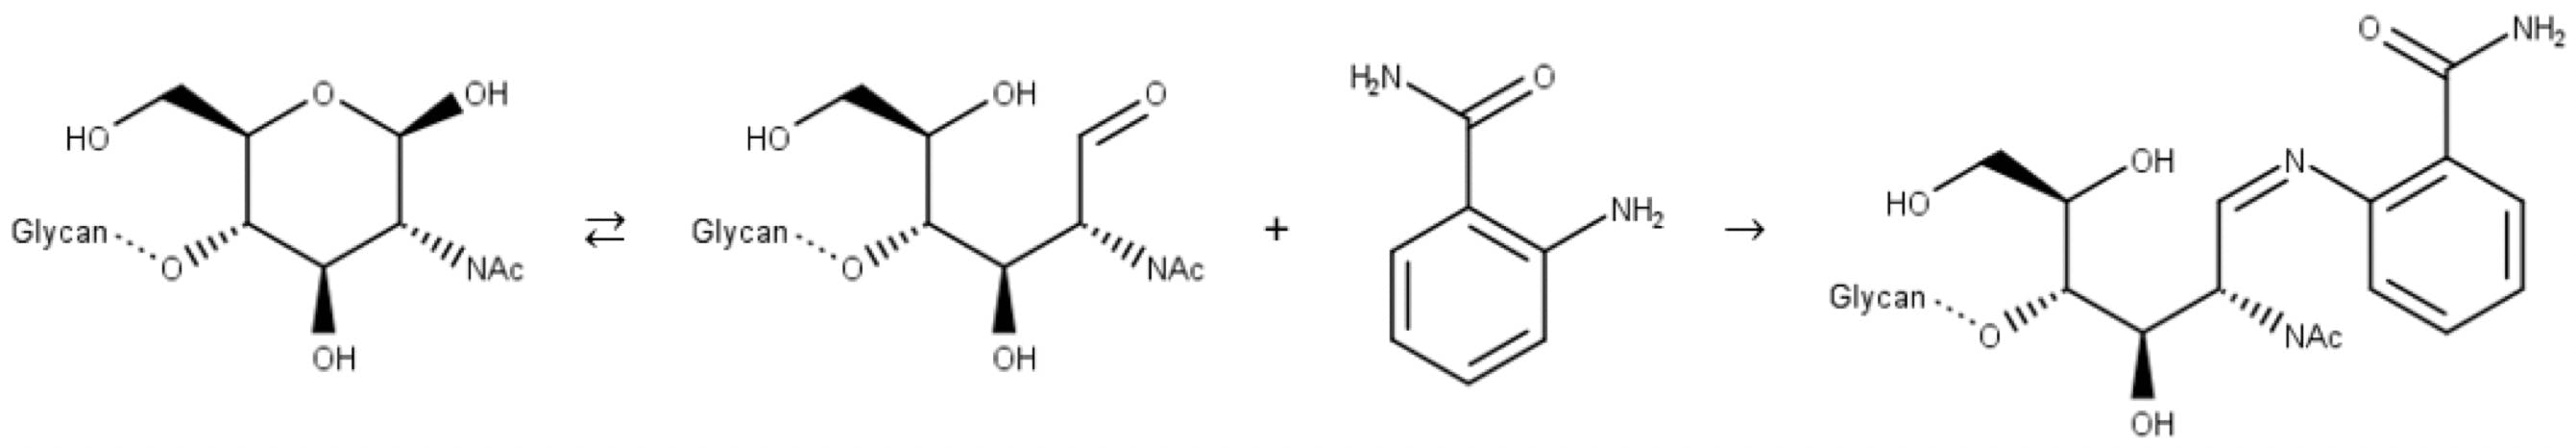 Reductive amination of a glycan. Step 1: imine formation